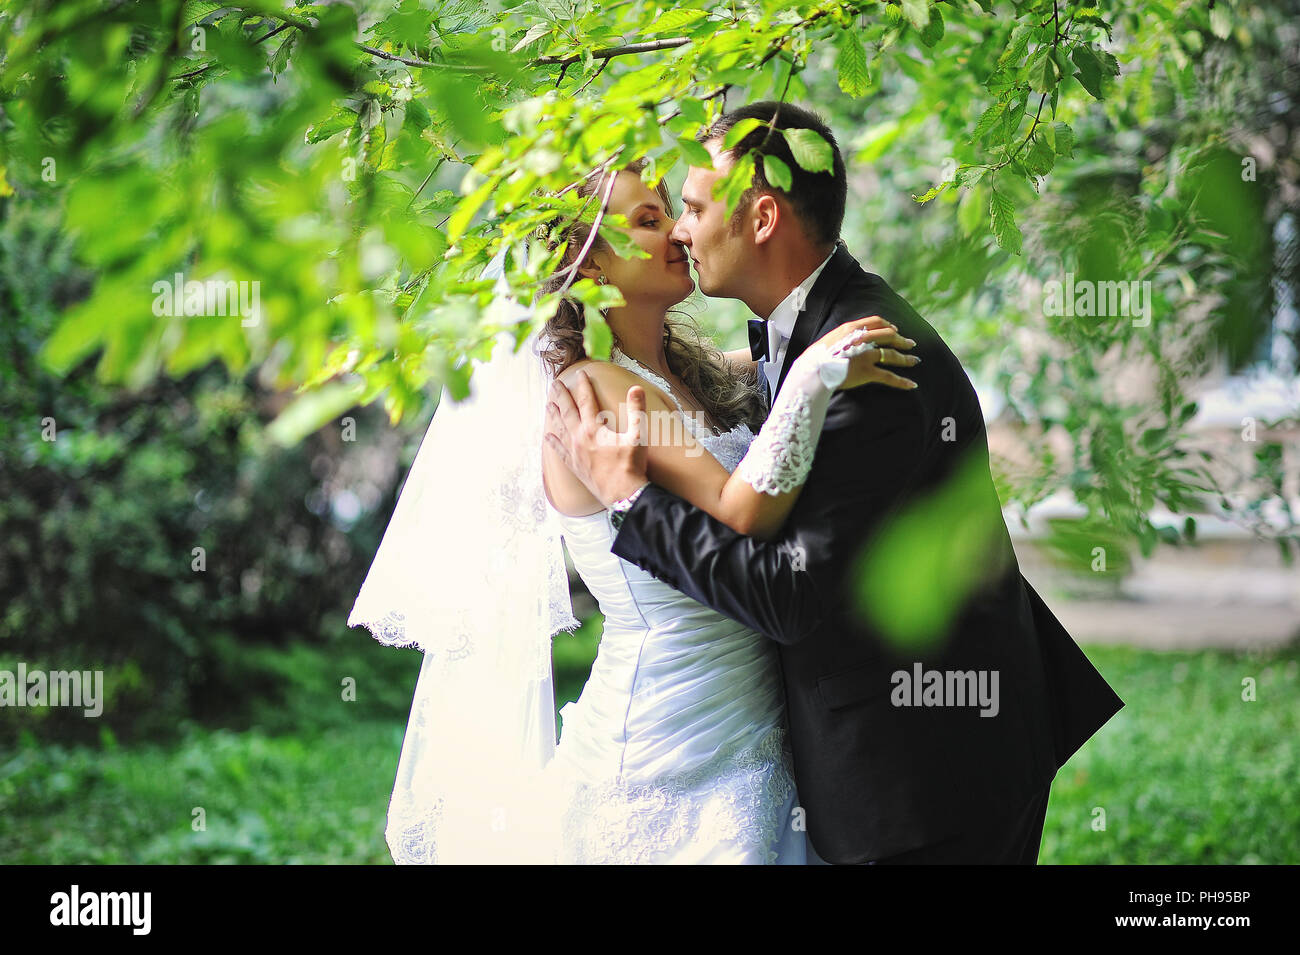 wedding couple under the tree at their lucky day Stock Photo